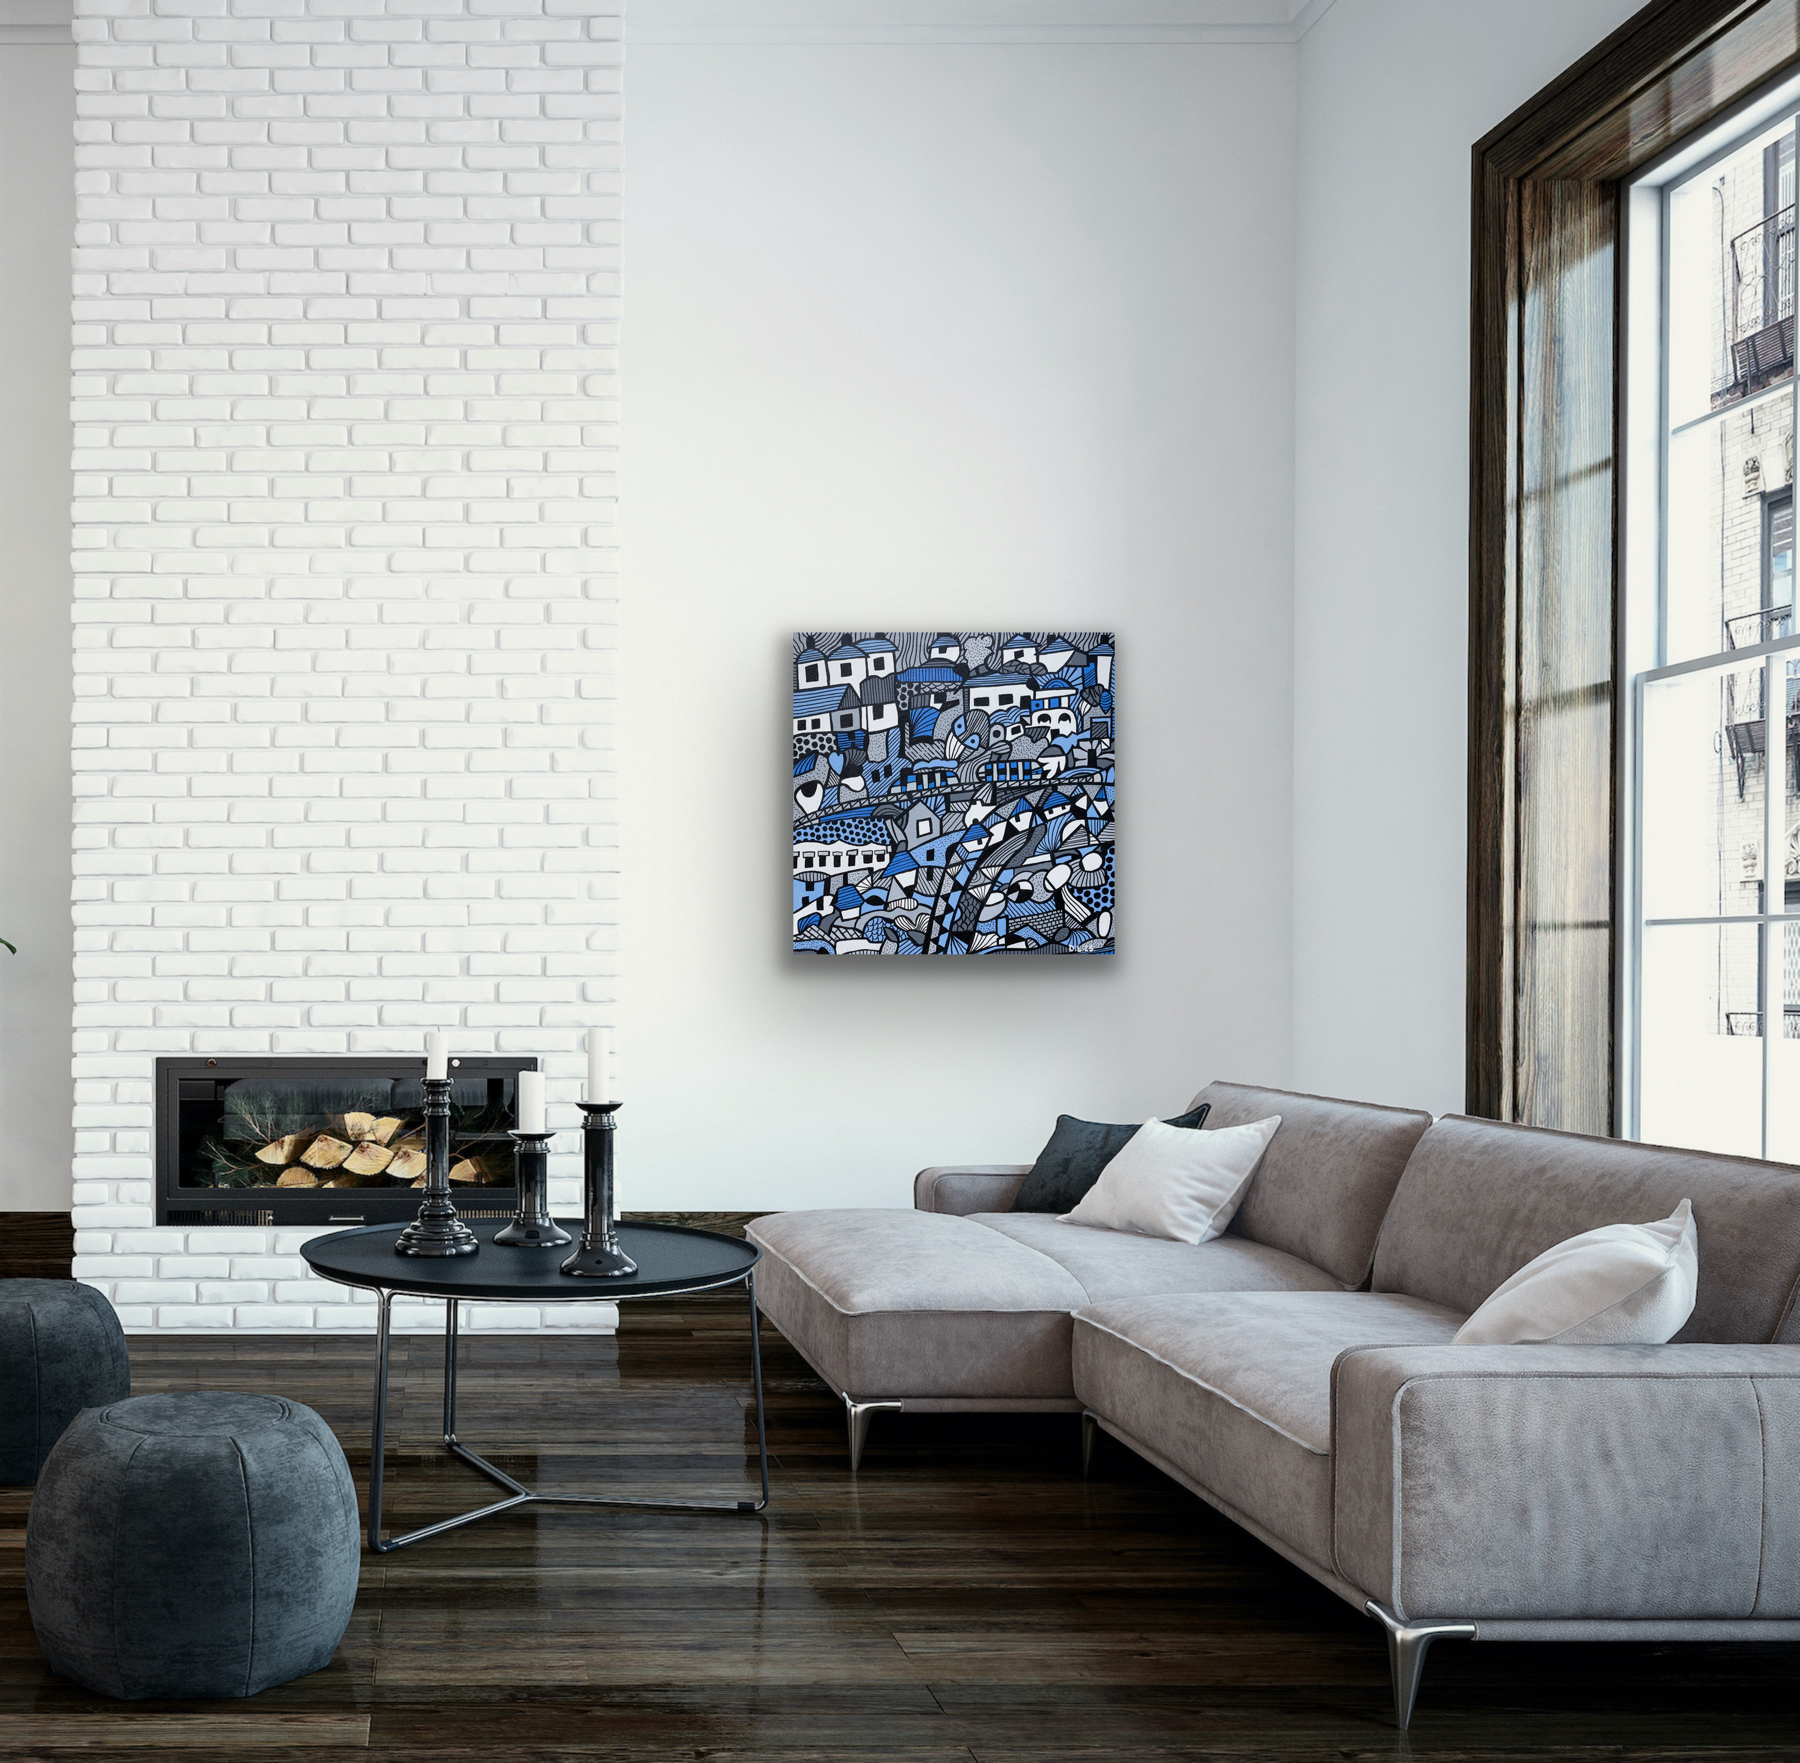 'Oh Porto" art work will look great in your living room, dining room, hallway or even a bedroom.